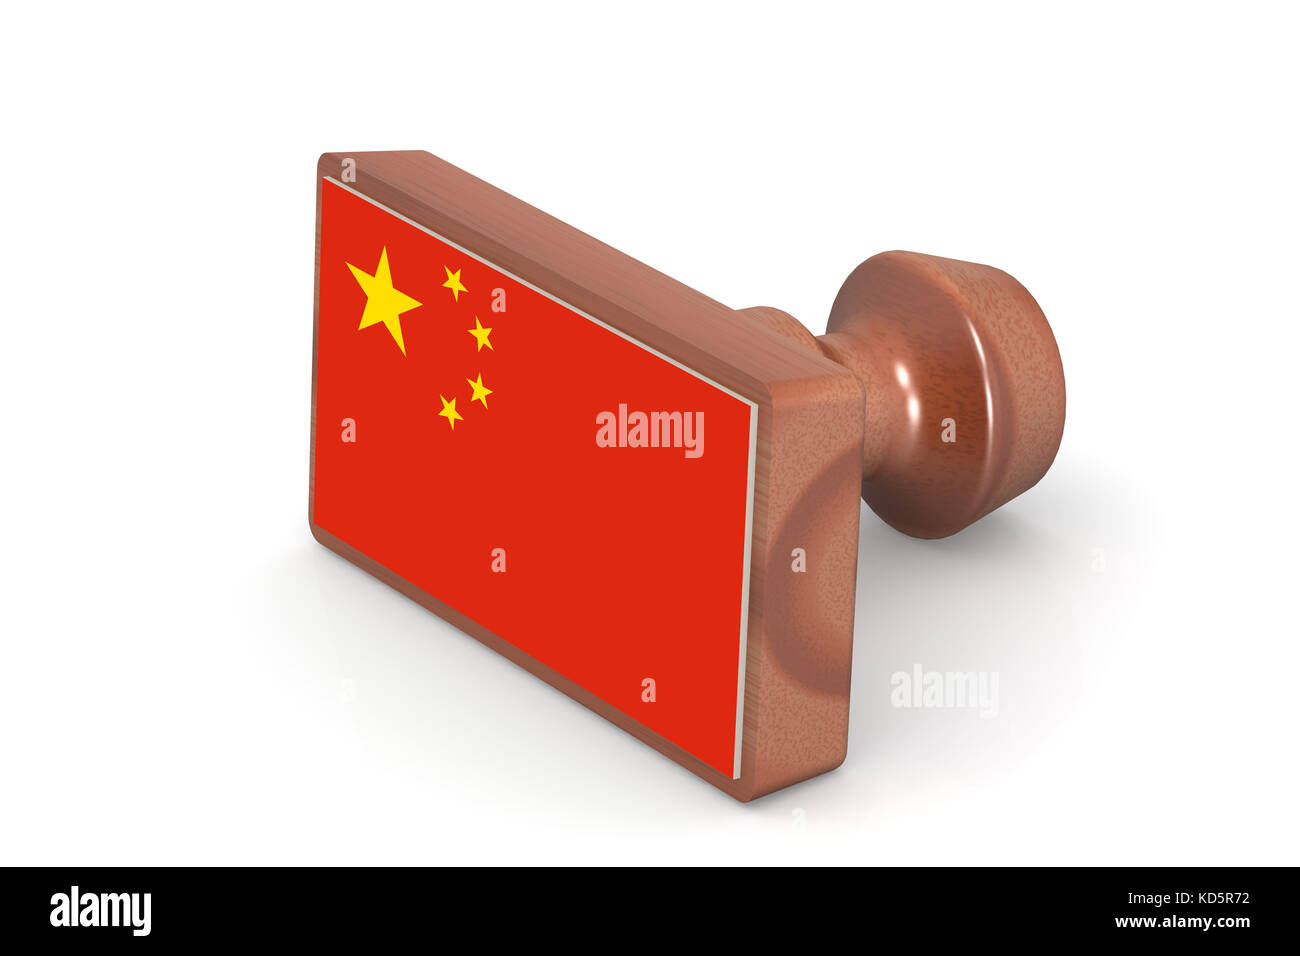 Wooden stamp with China flag image with hi-res rendered artwork that could be used for any graphic design. Stock Photo